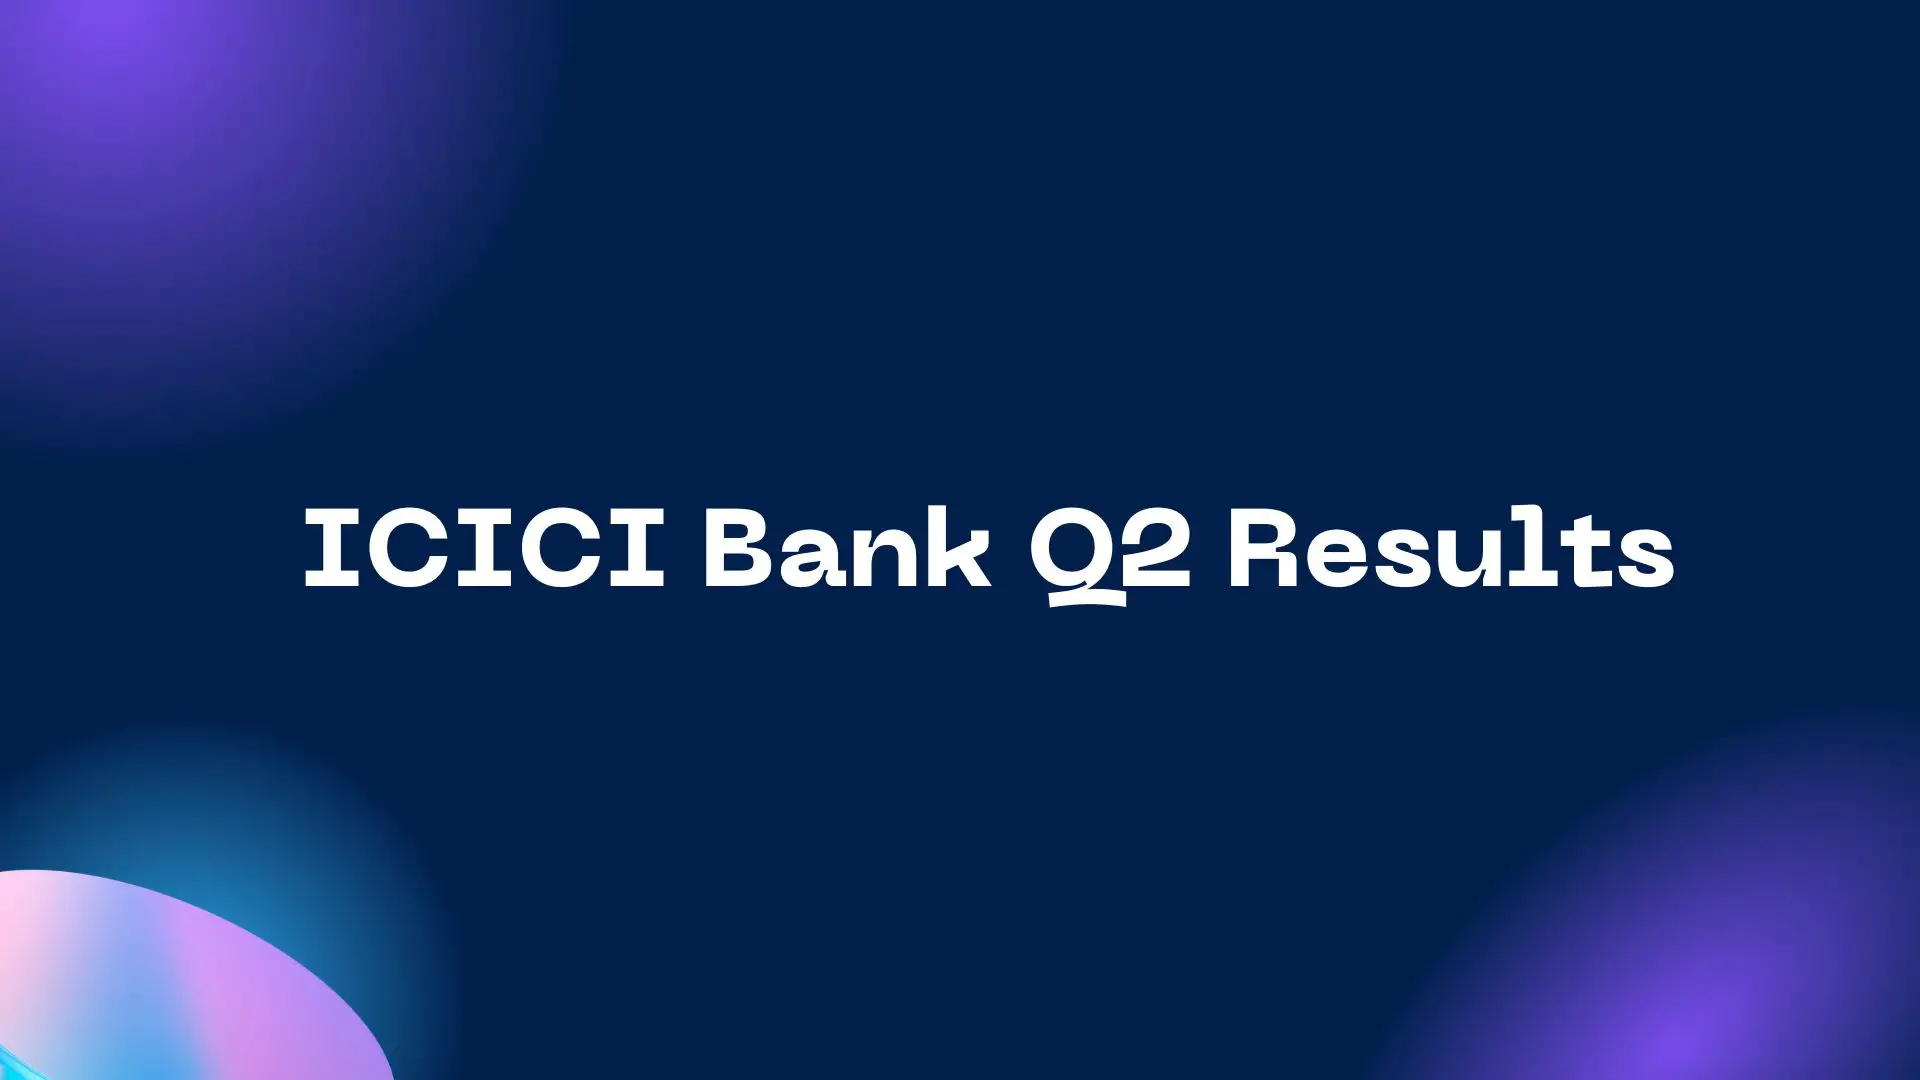 ICICI Bank Q2 Results